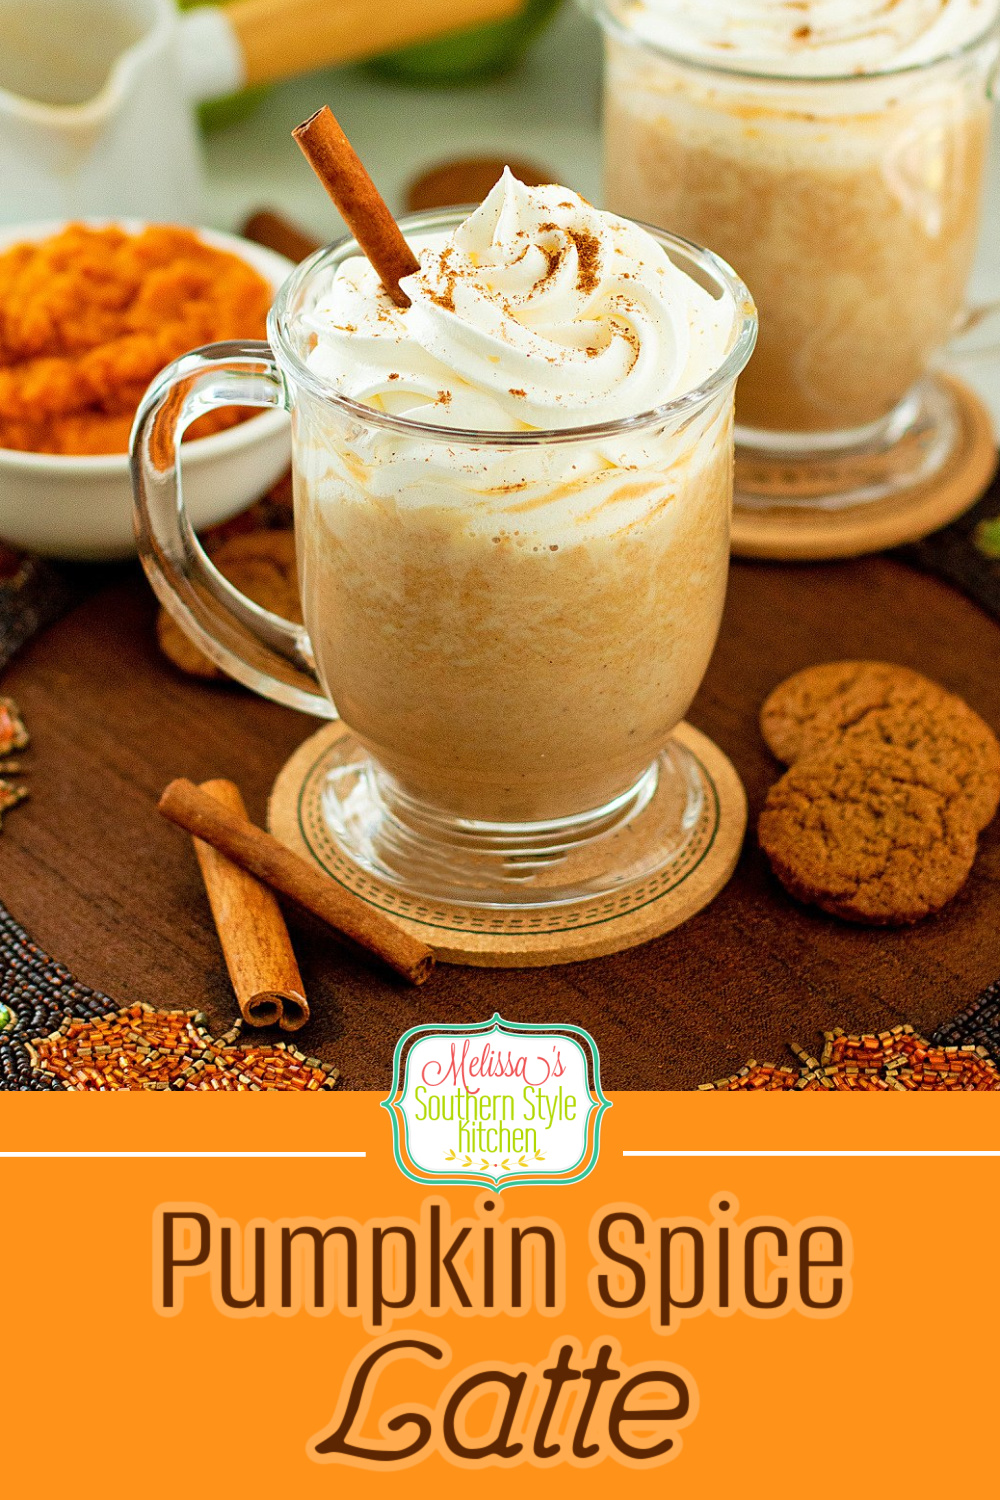 Skip the long line at the drive thru and make this delicious Pumpkin Spice Latte recipe just the way you like it at home #pumpkinlatte #pumpkinspice #pumpkinspicerecipe #pumpkinspicelatte #latterecipe #lattes #starbuckslattes #copycatpumpkinspicelattee